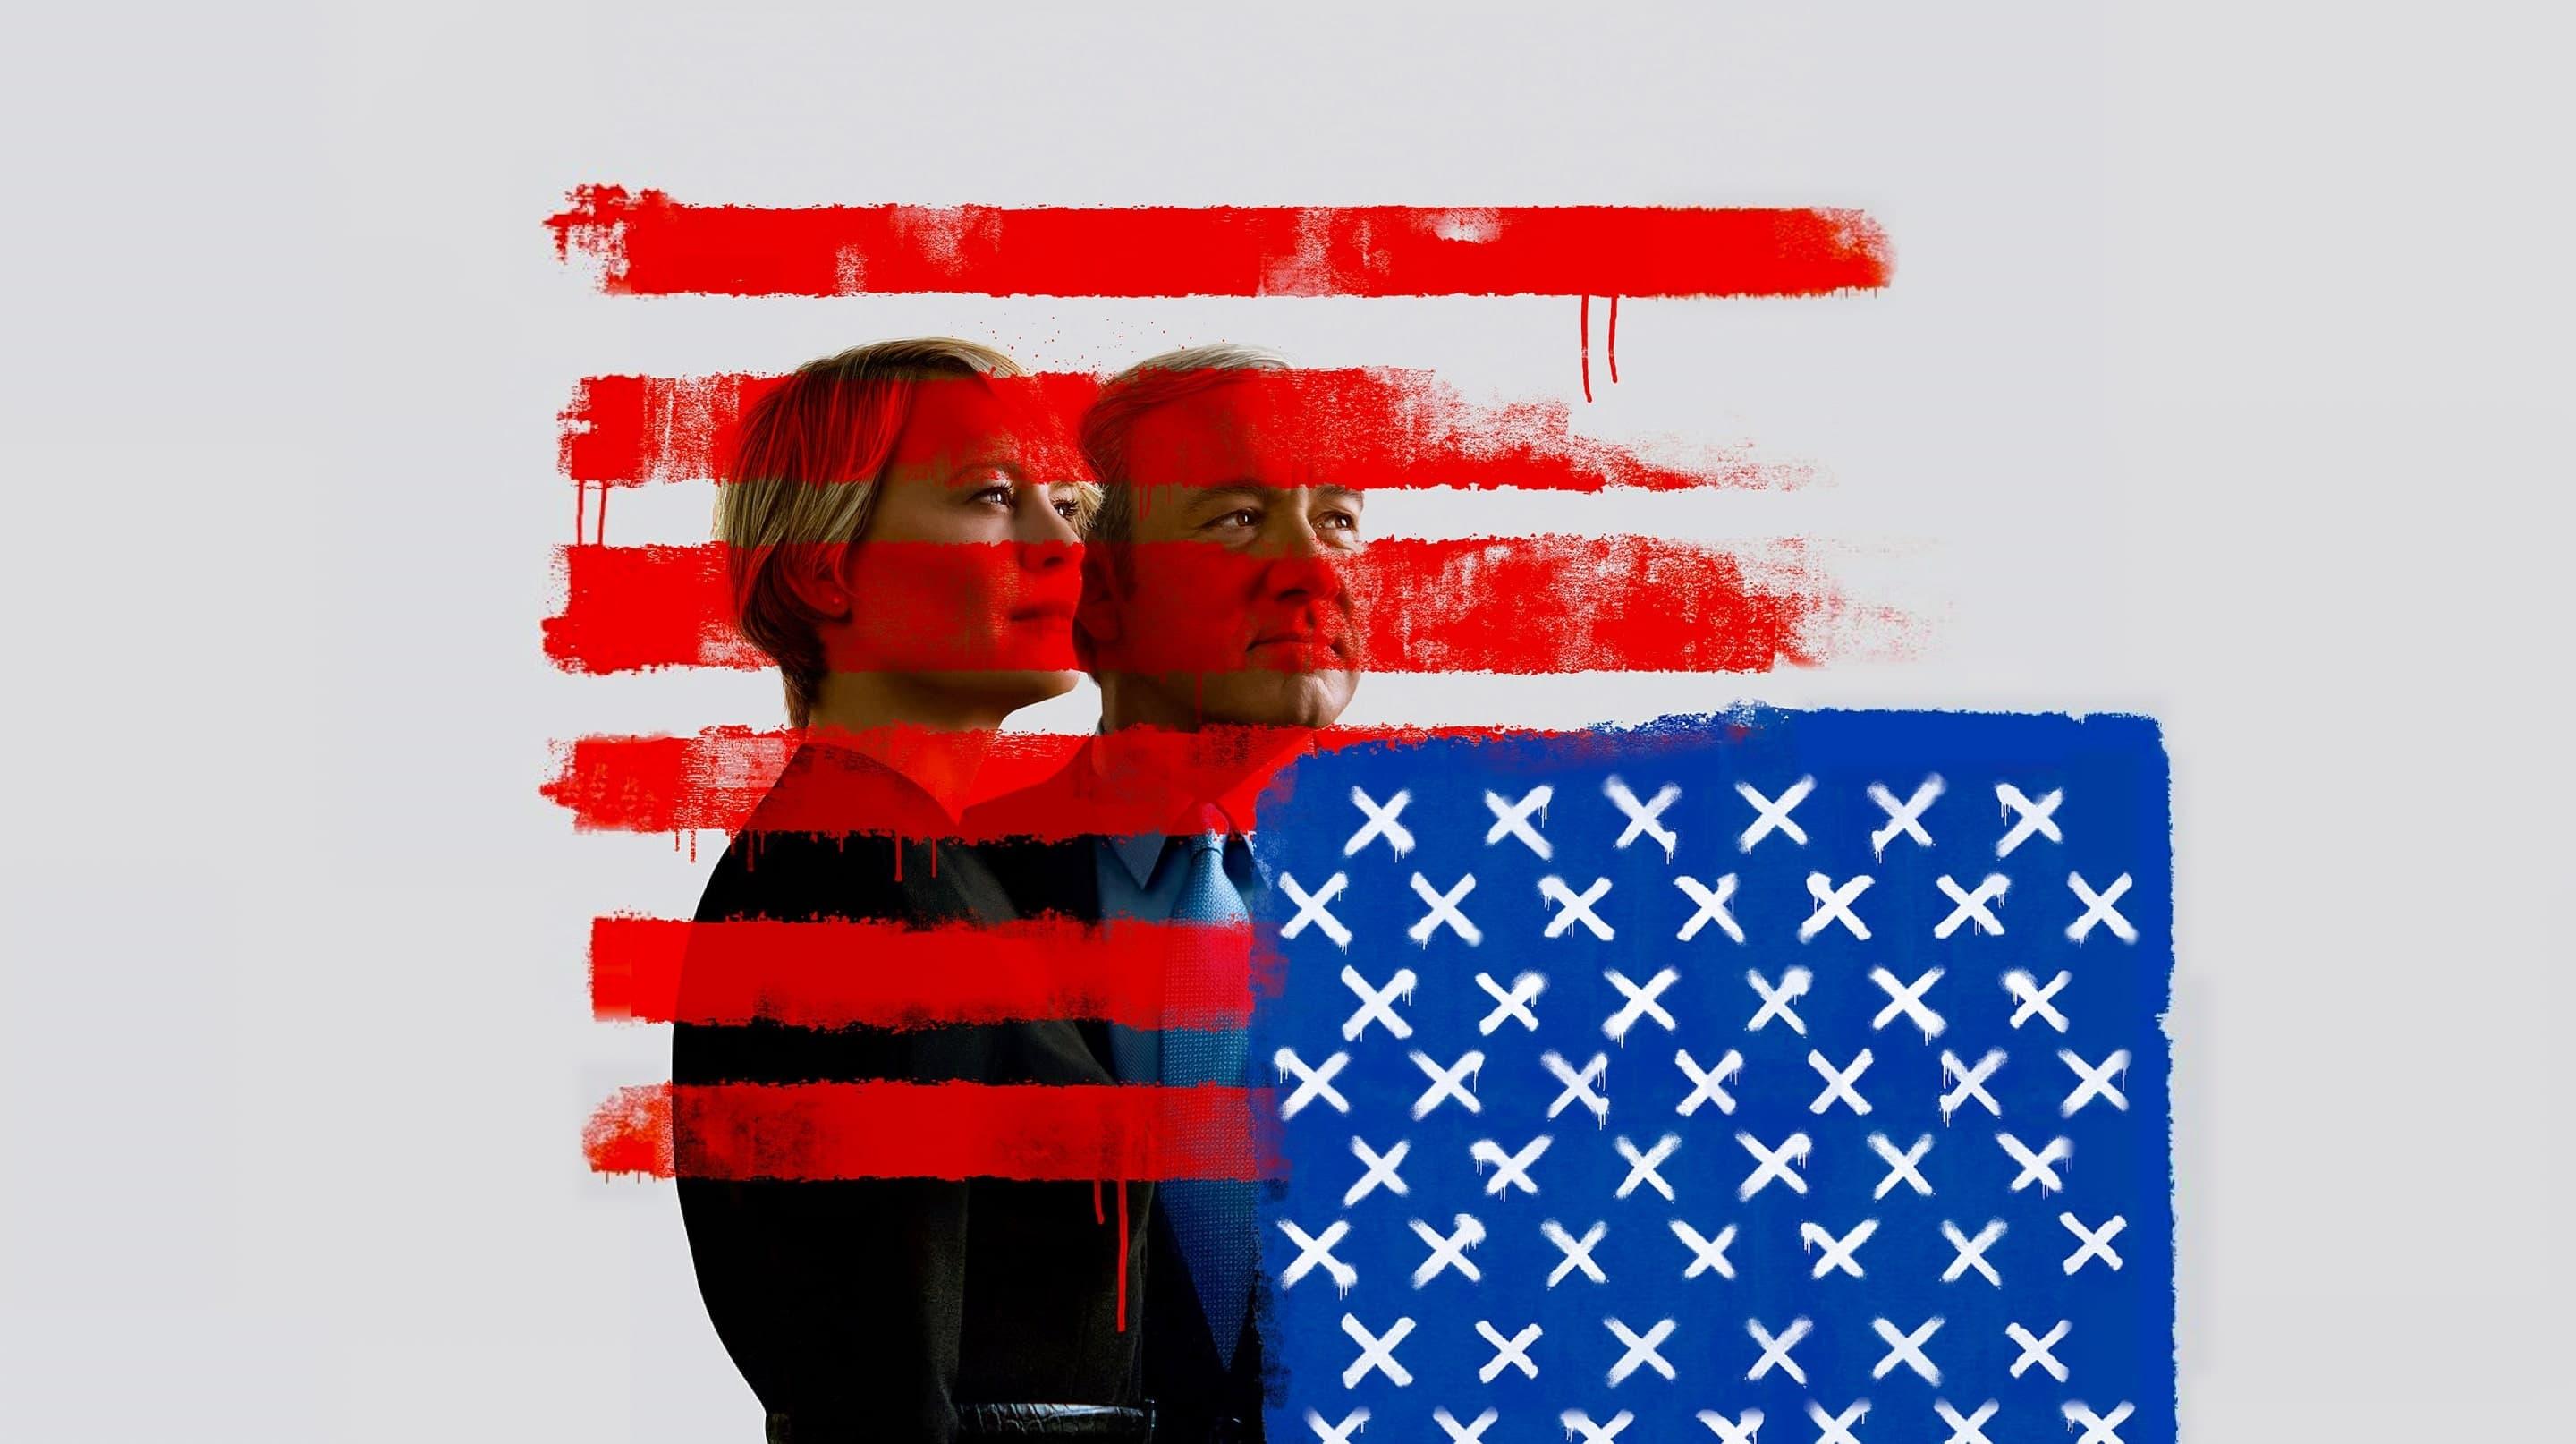 House of Cards backdrop